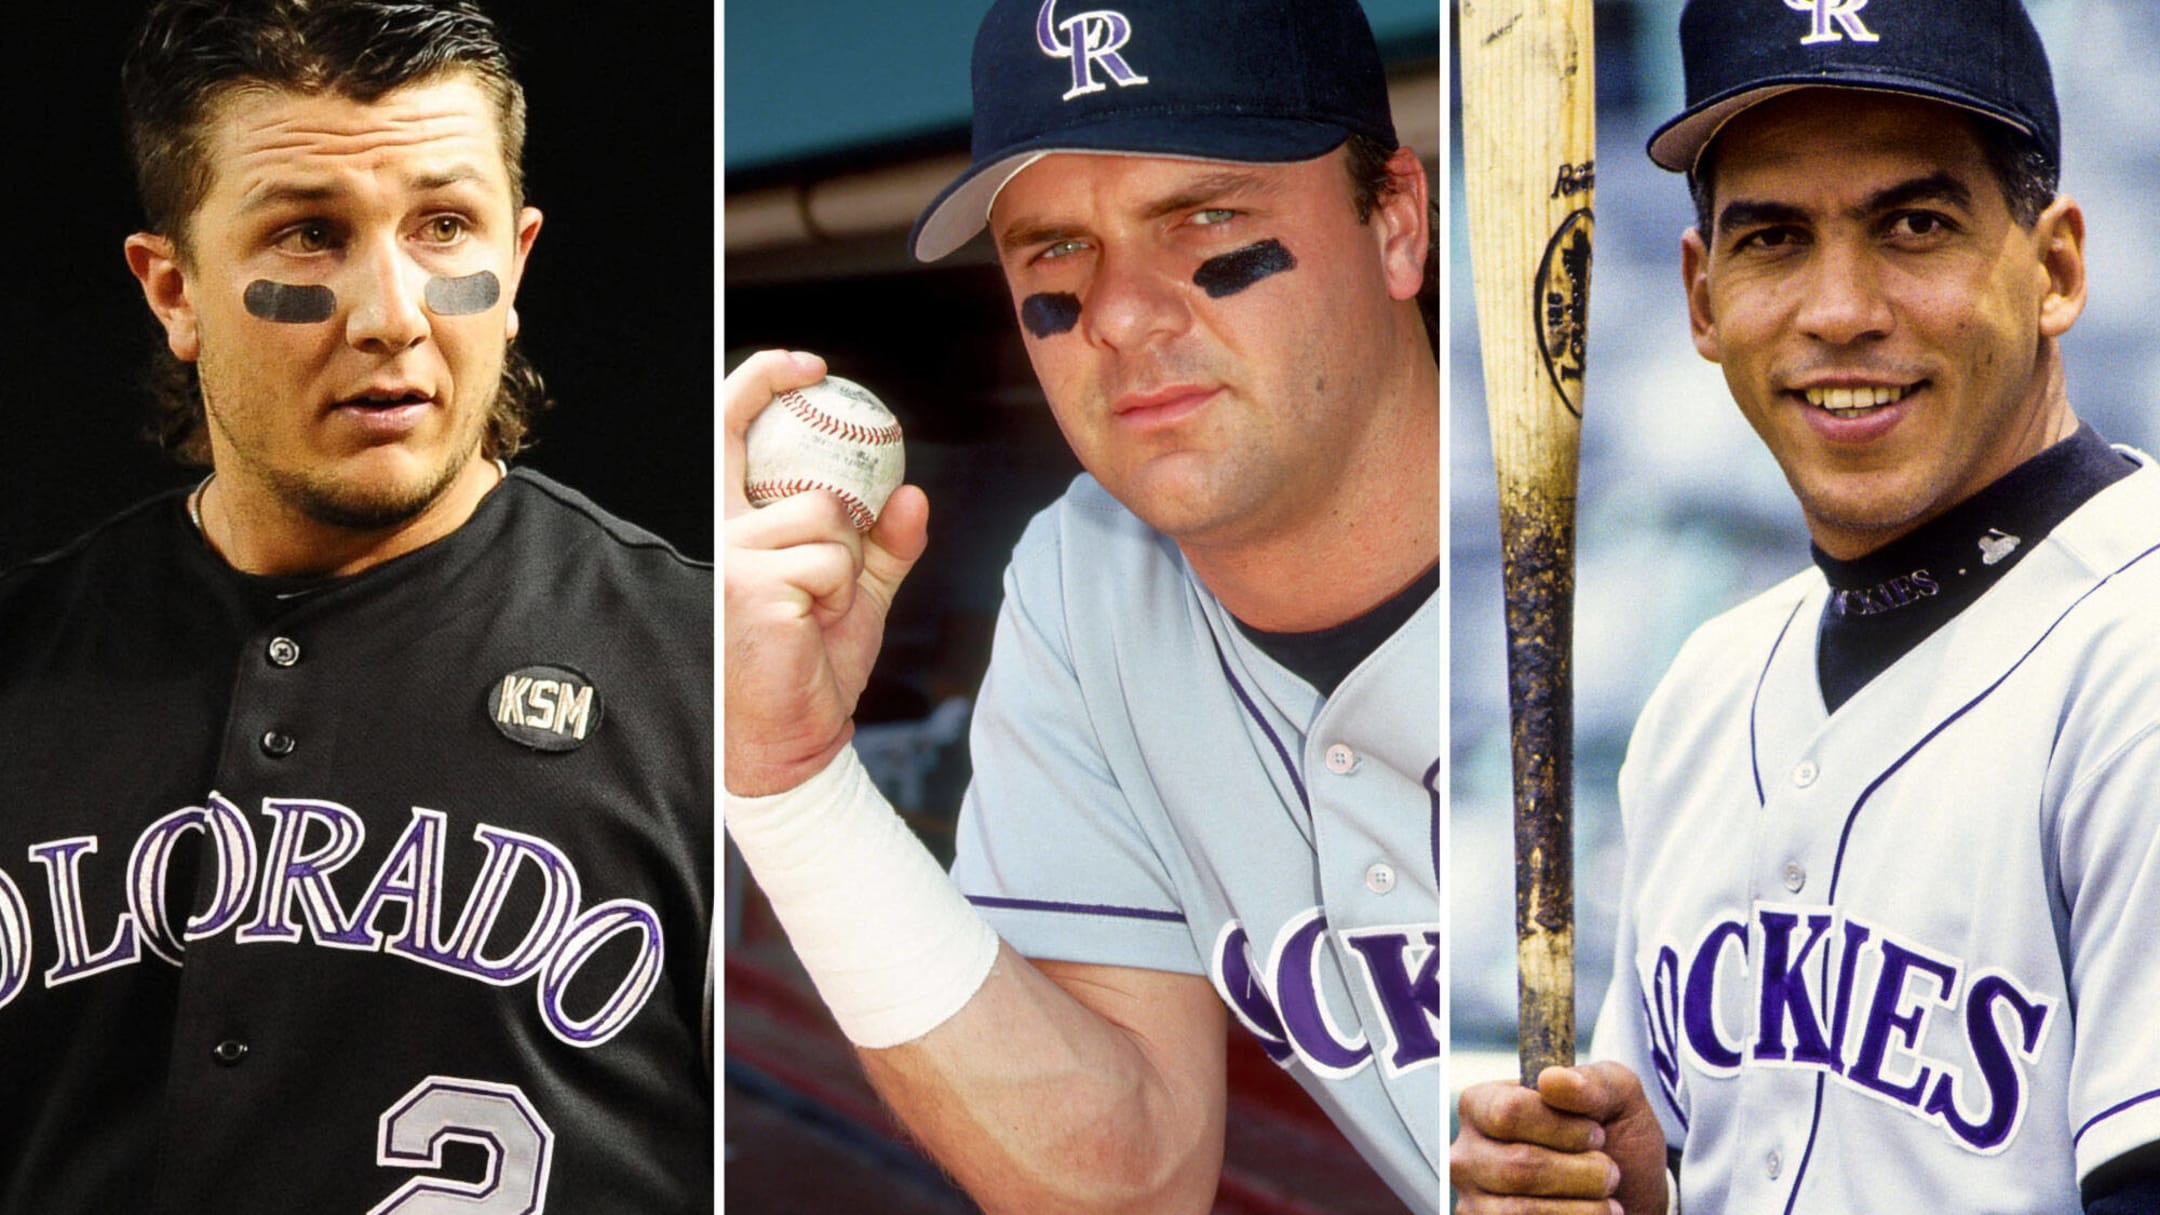 Colorado Rockies, 6 other clubs selected for new city uniforms